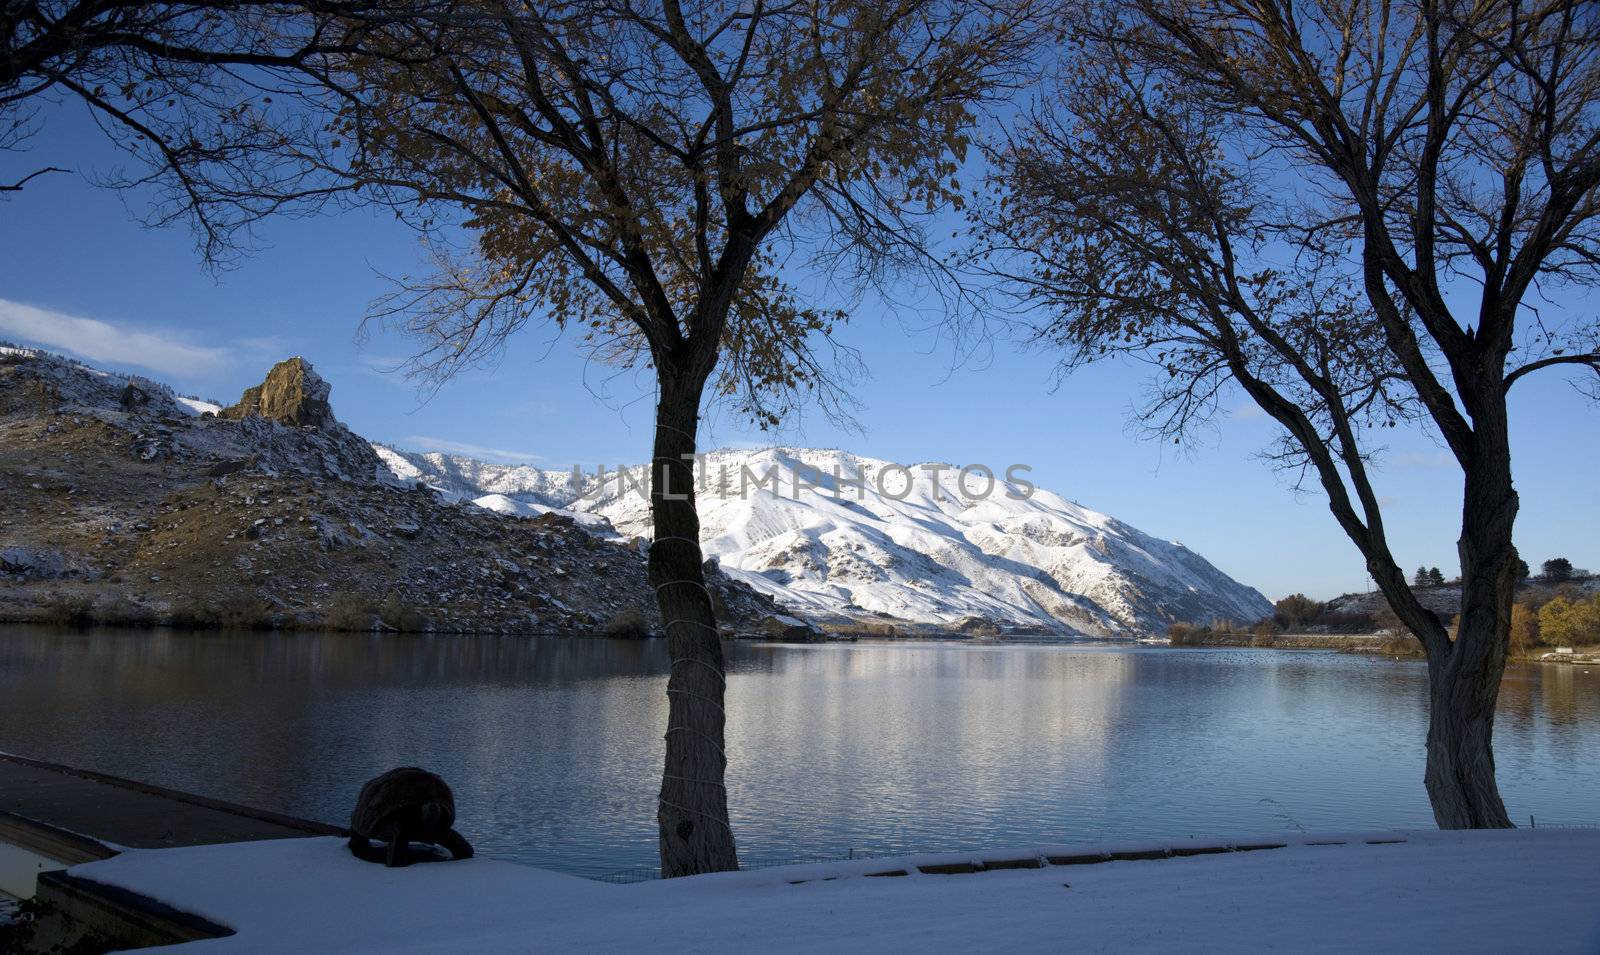 Winter Snow on the Peaceful Columbia River under the trees looking at a rock butte